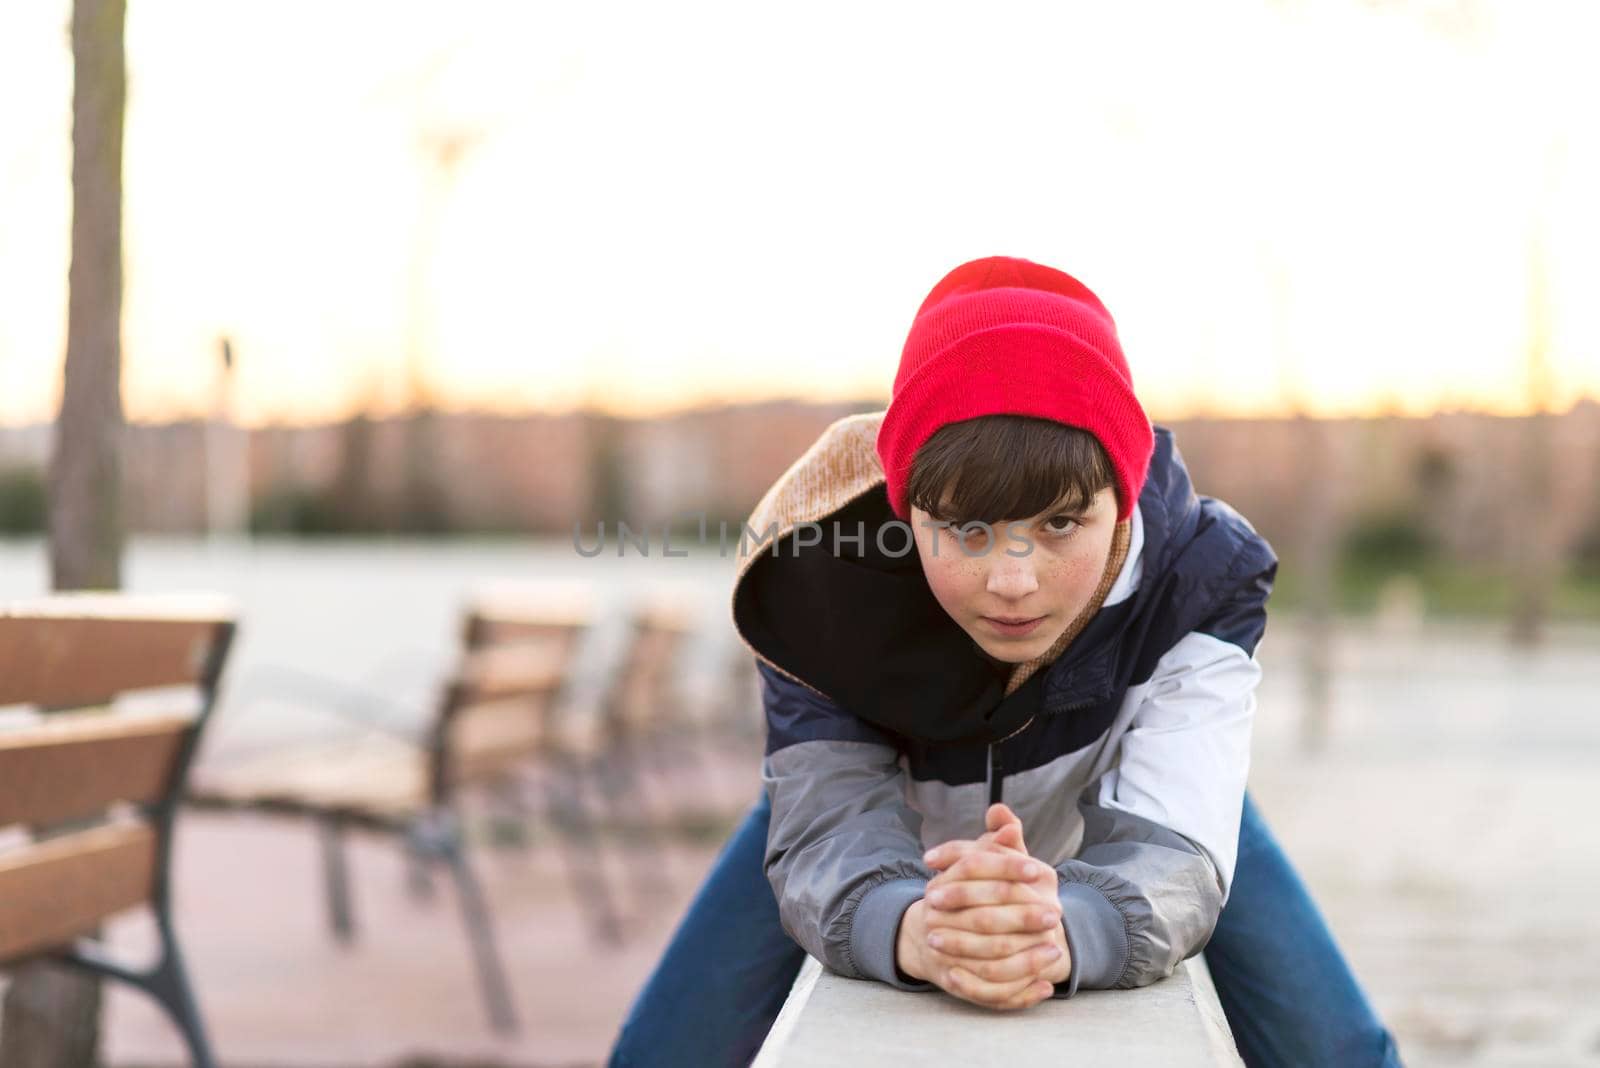 Stylish teenager sitting on a fence in a city park